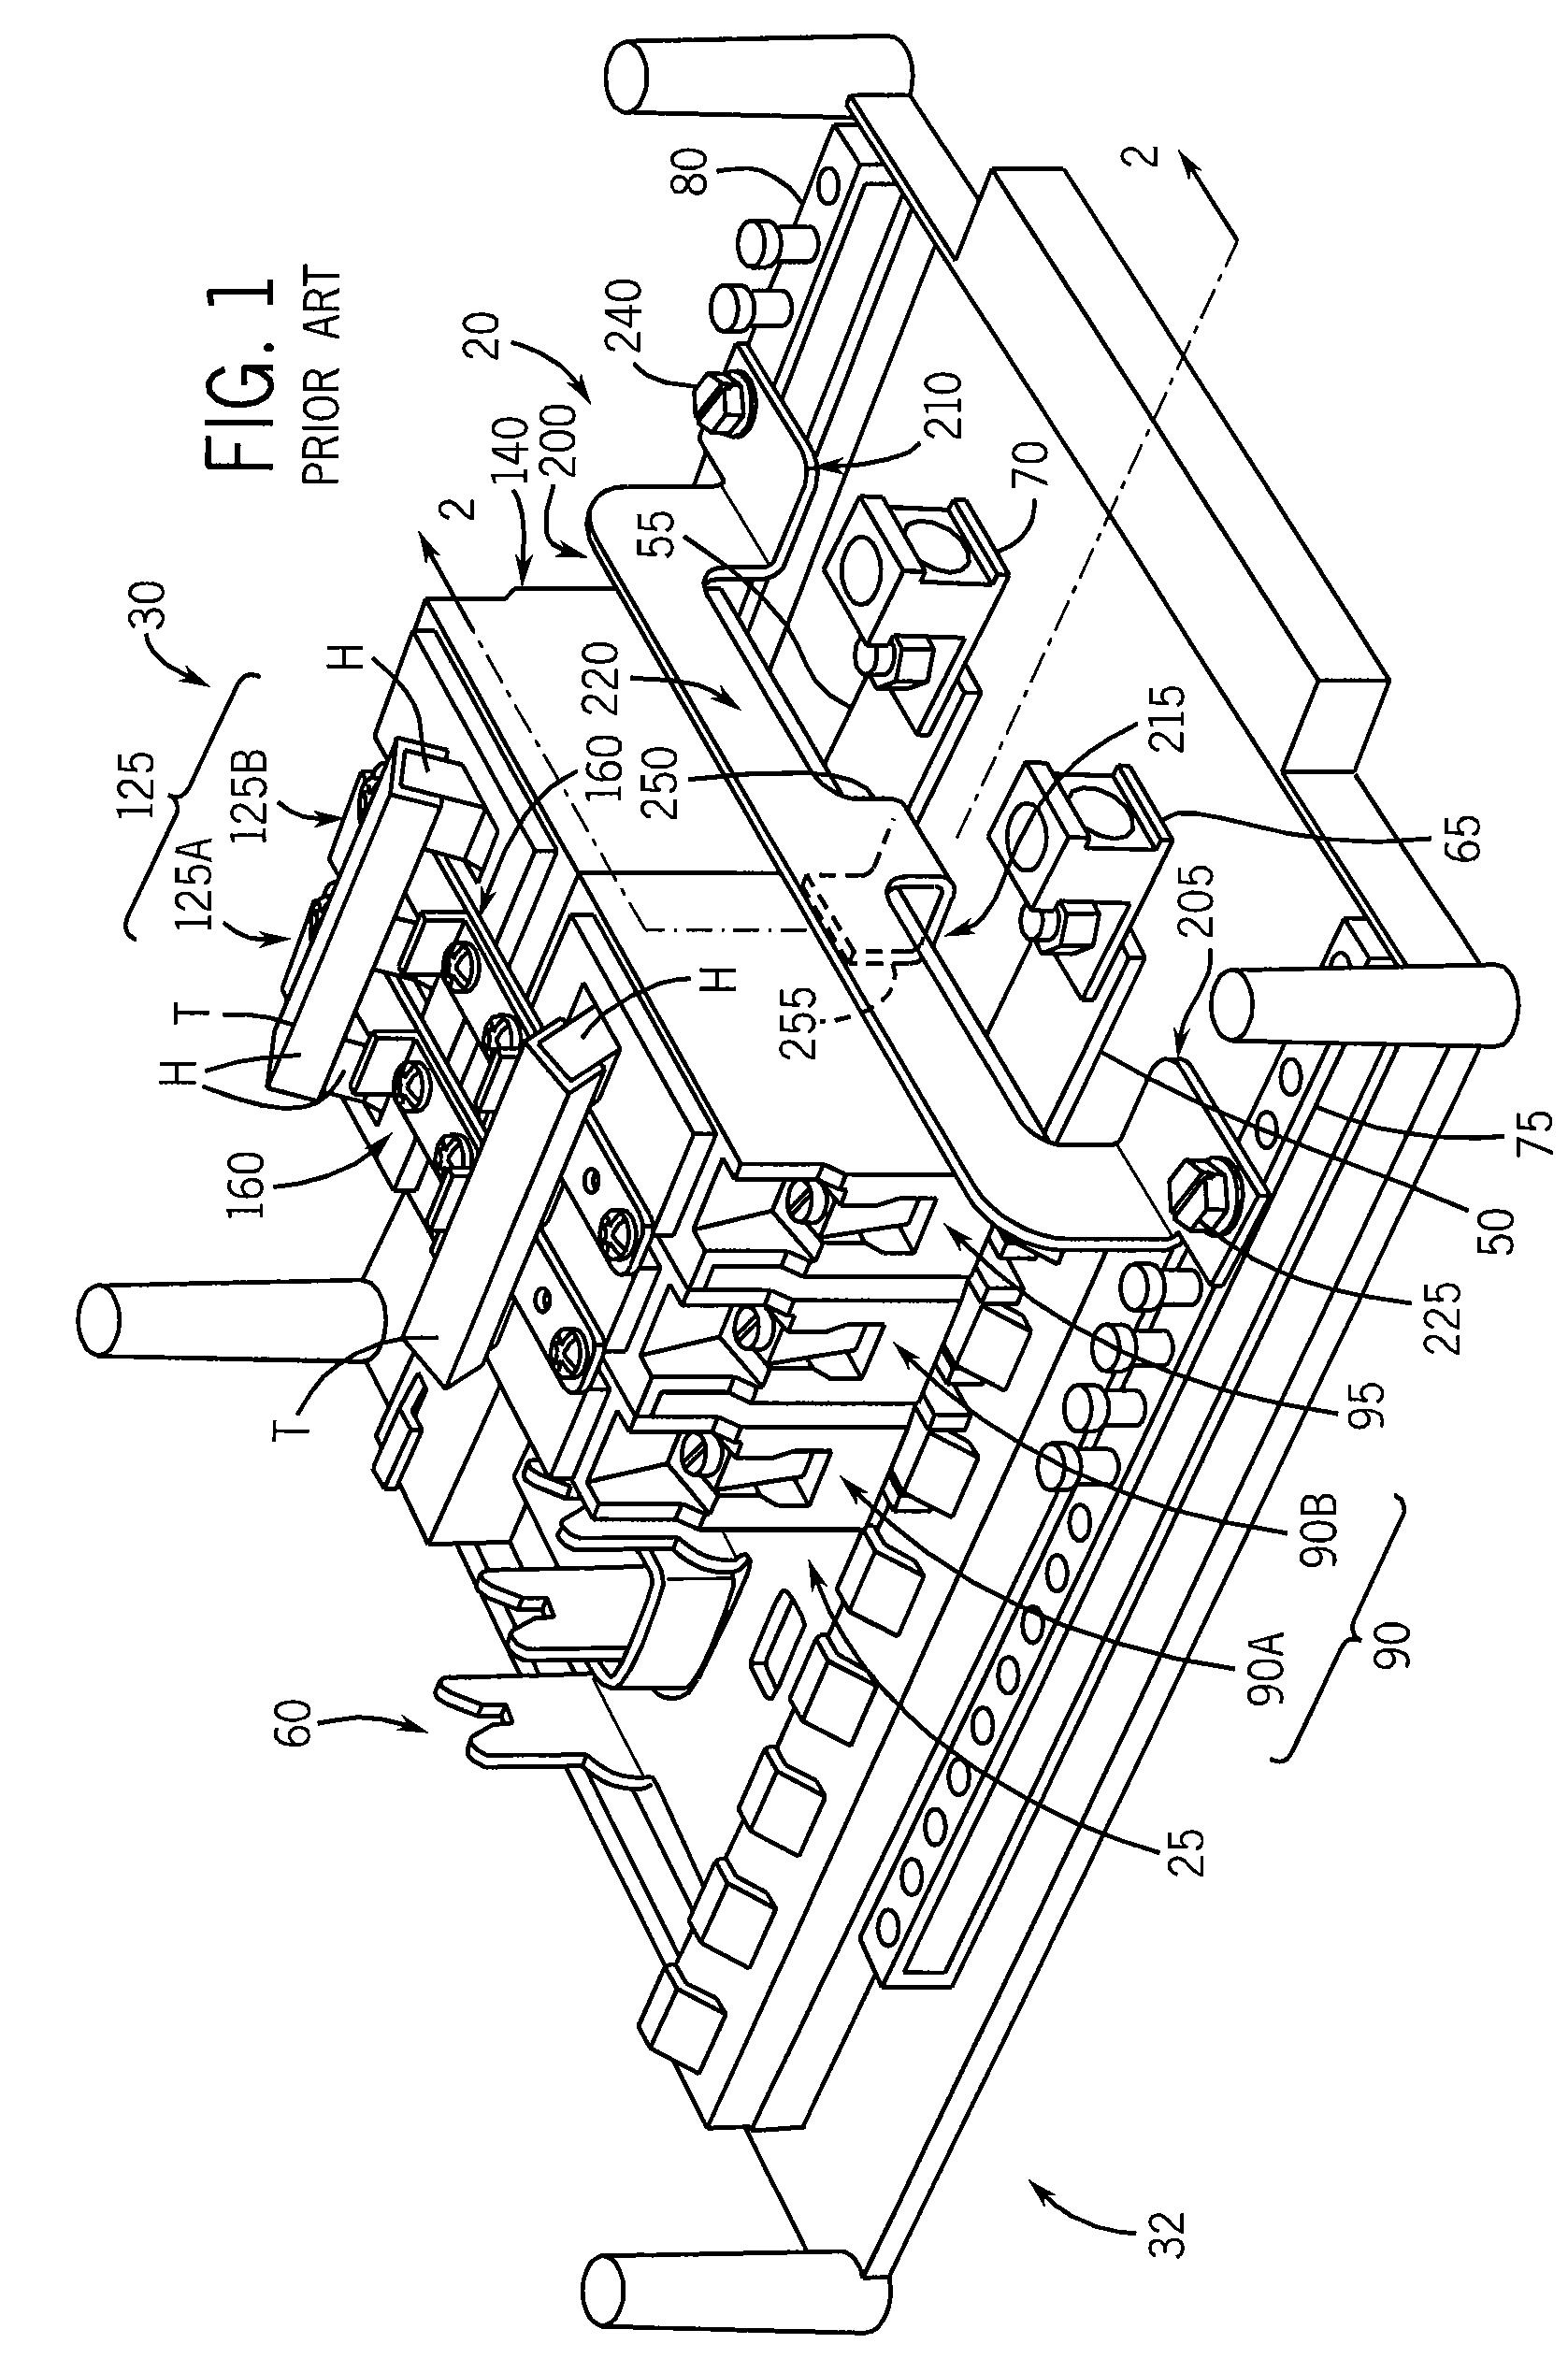 Electrical panel having electrically isolated neutral stab